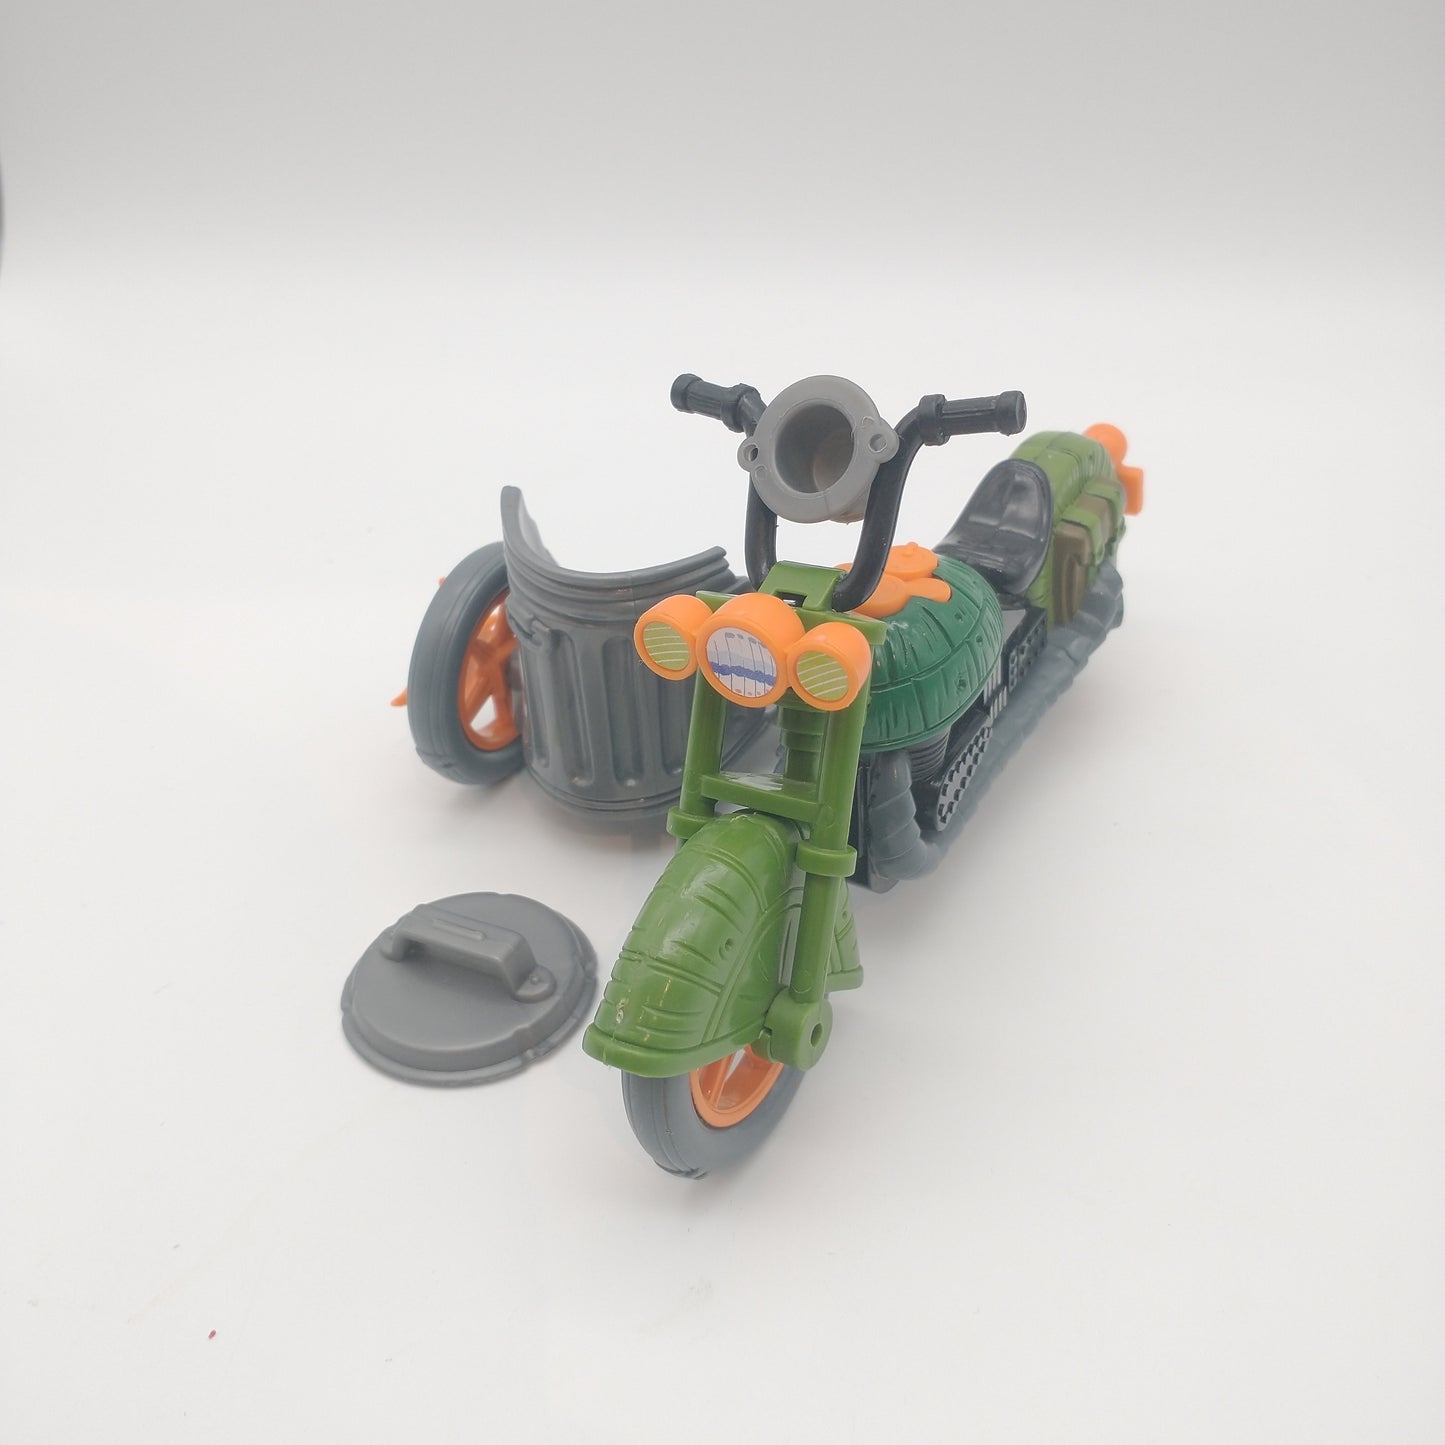 TMNT Turtlecycle 1989 Loose, 100% Complete